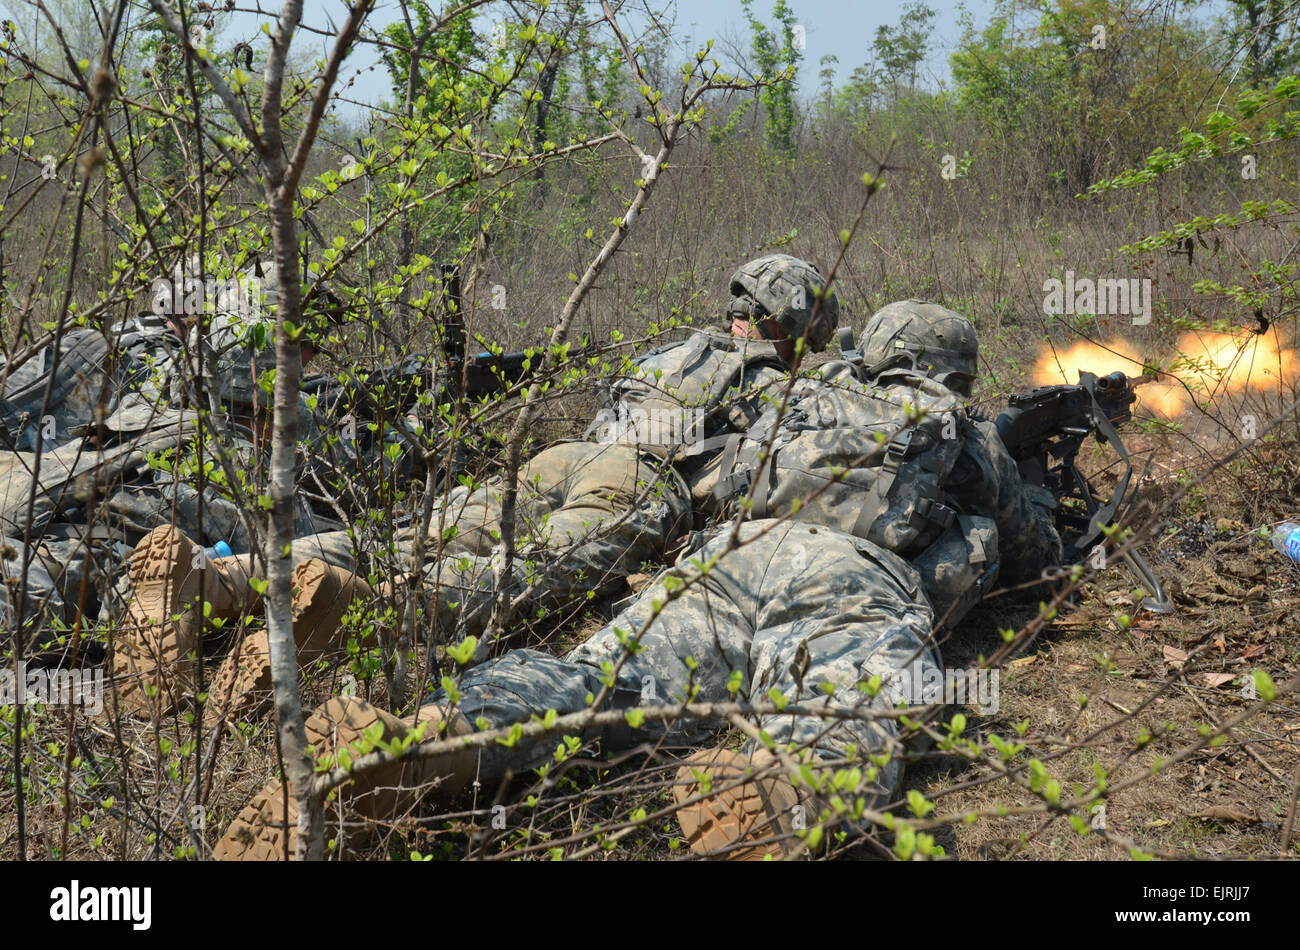 Soldiers of 1st Platoon, Company B, 2nd Battalion, 9th Infantry Regiment, 1st Armored Brigade Combat Team, 2nd Infantry Division, fire the M240B machine gun on their objective at a platoon live fire exercise Feb. 15, 2013, during the annual exercise Cobra Gold in Dan Ban Lan Hoi, Kingdom of Thailand.  Capt. Lindsey Elder, 1st ABCT PAO Stock Photo